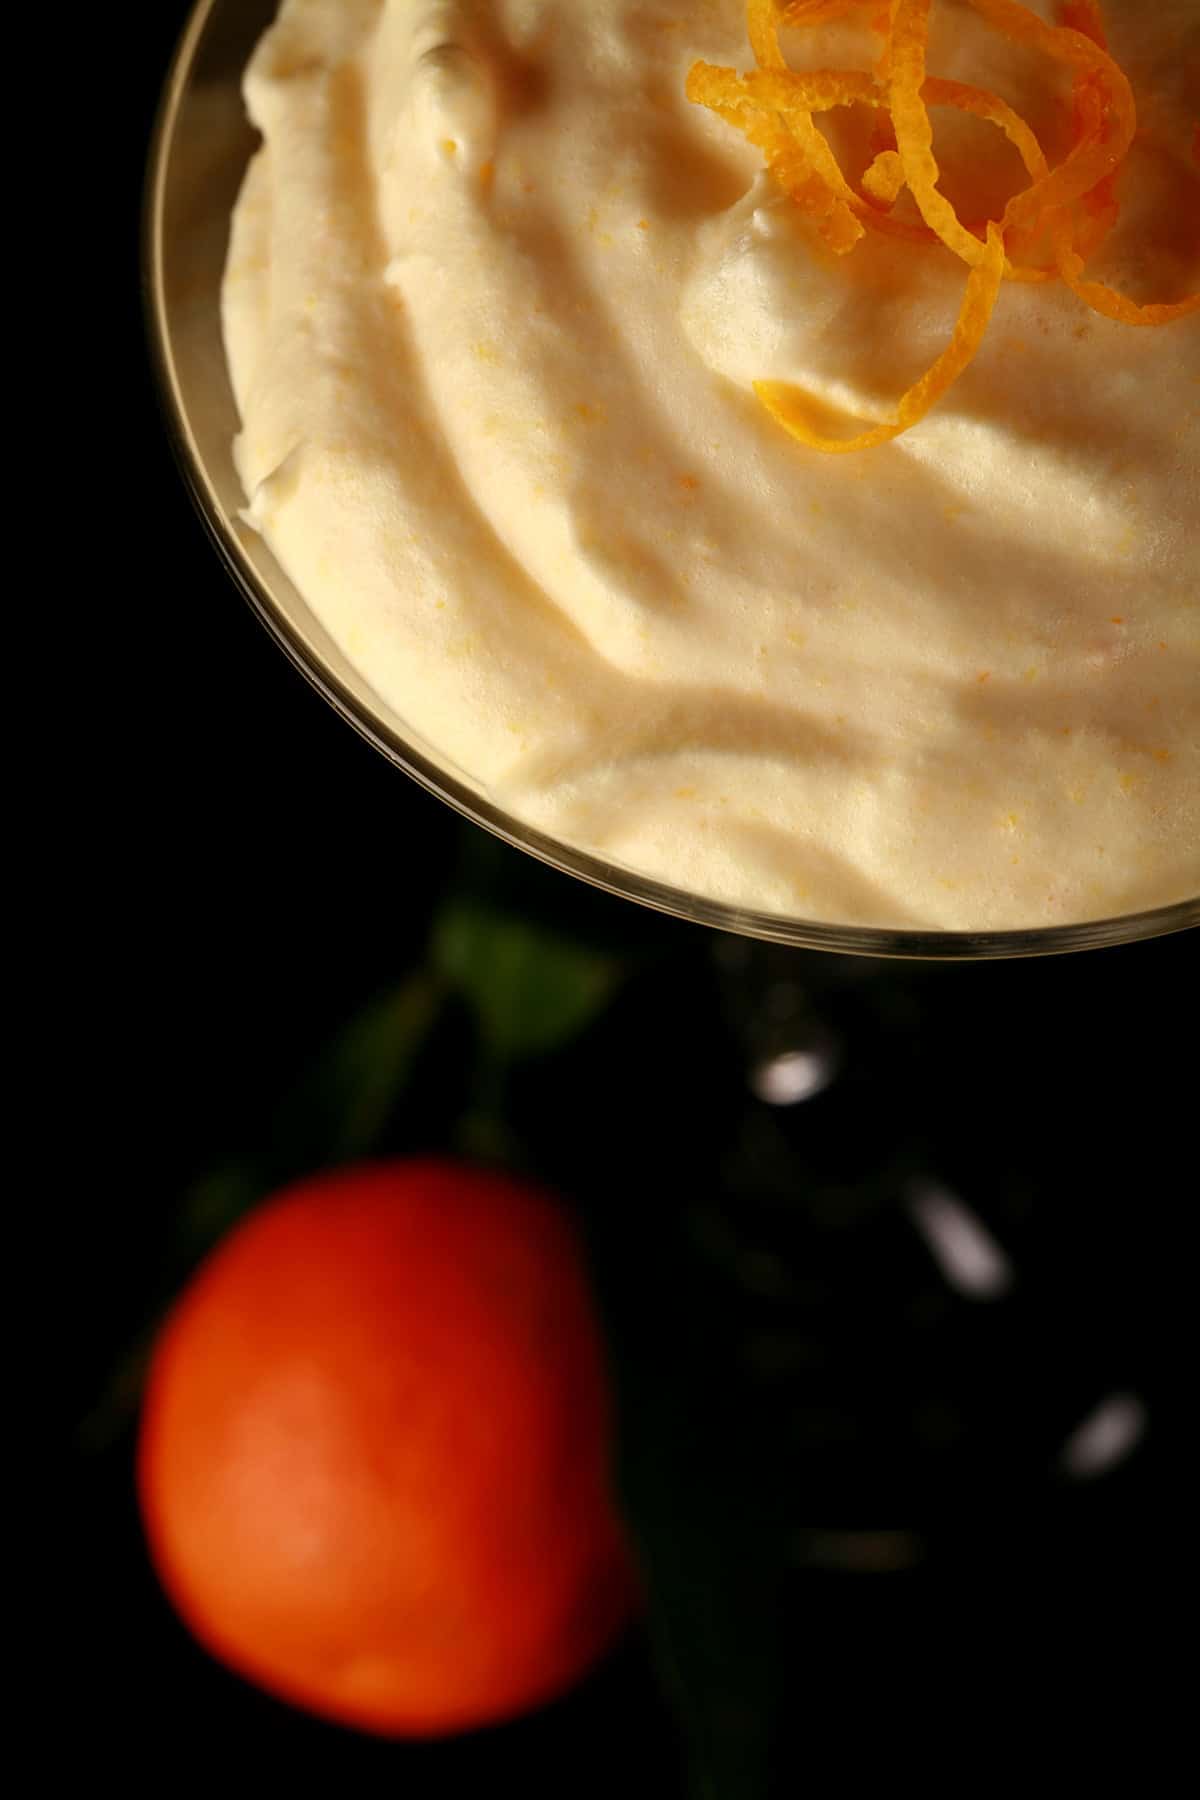 A martini glass is filled with an orange coloured clementine mousse. A clementine orange sits at the base of the glass.